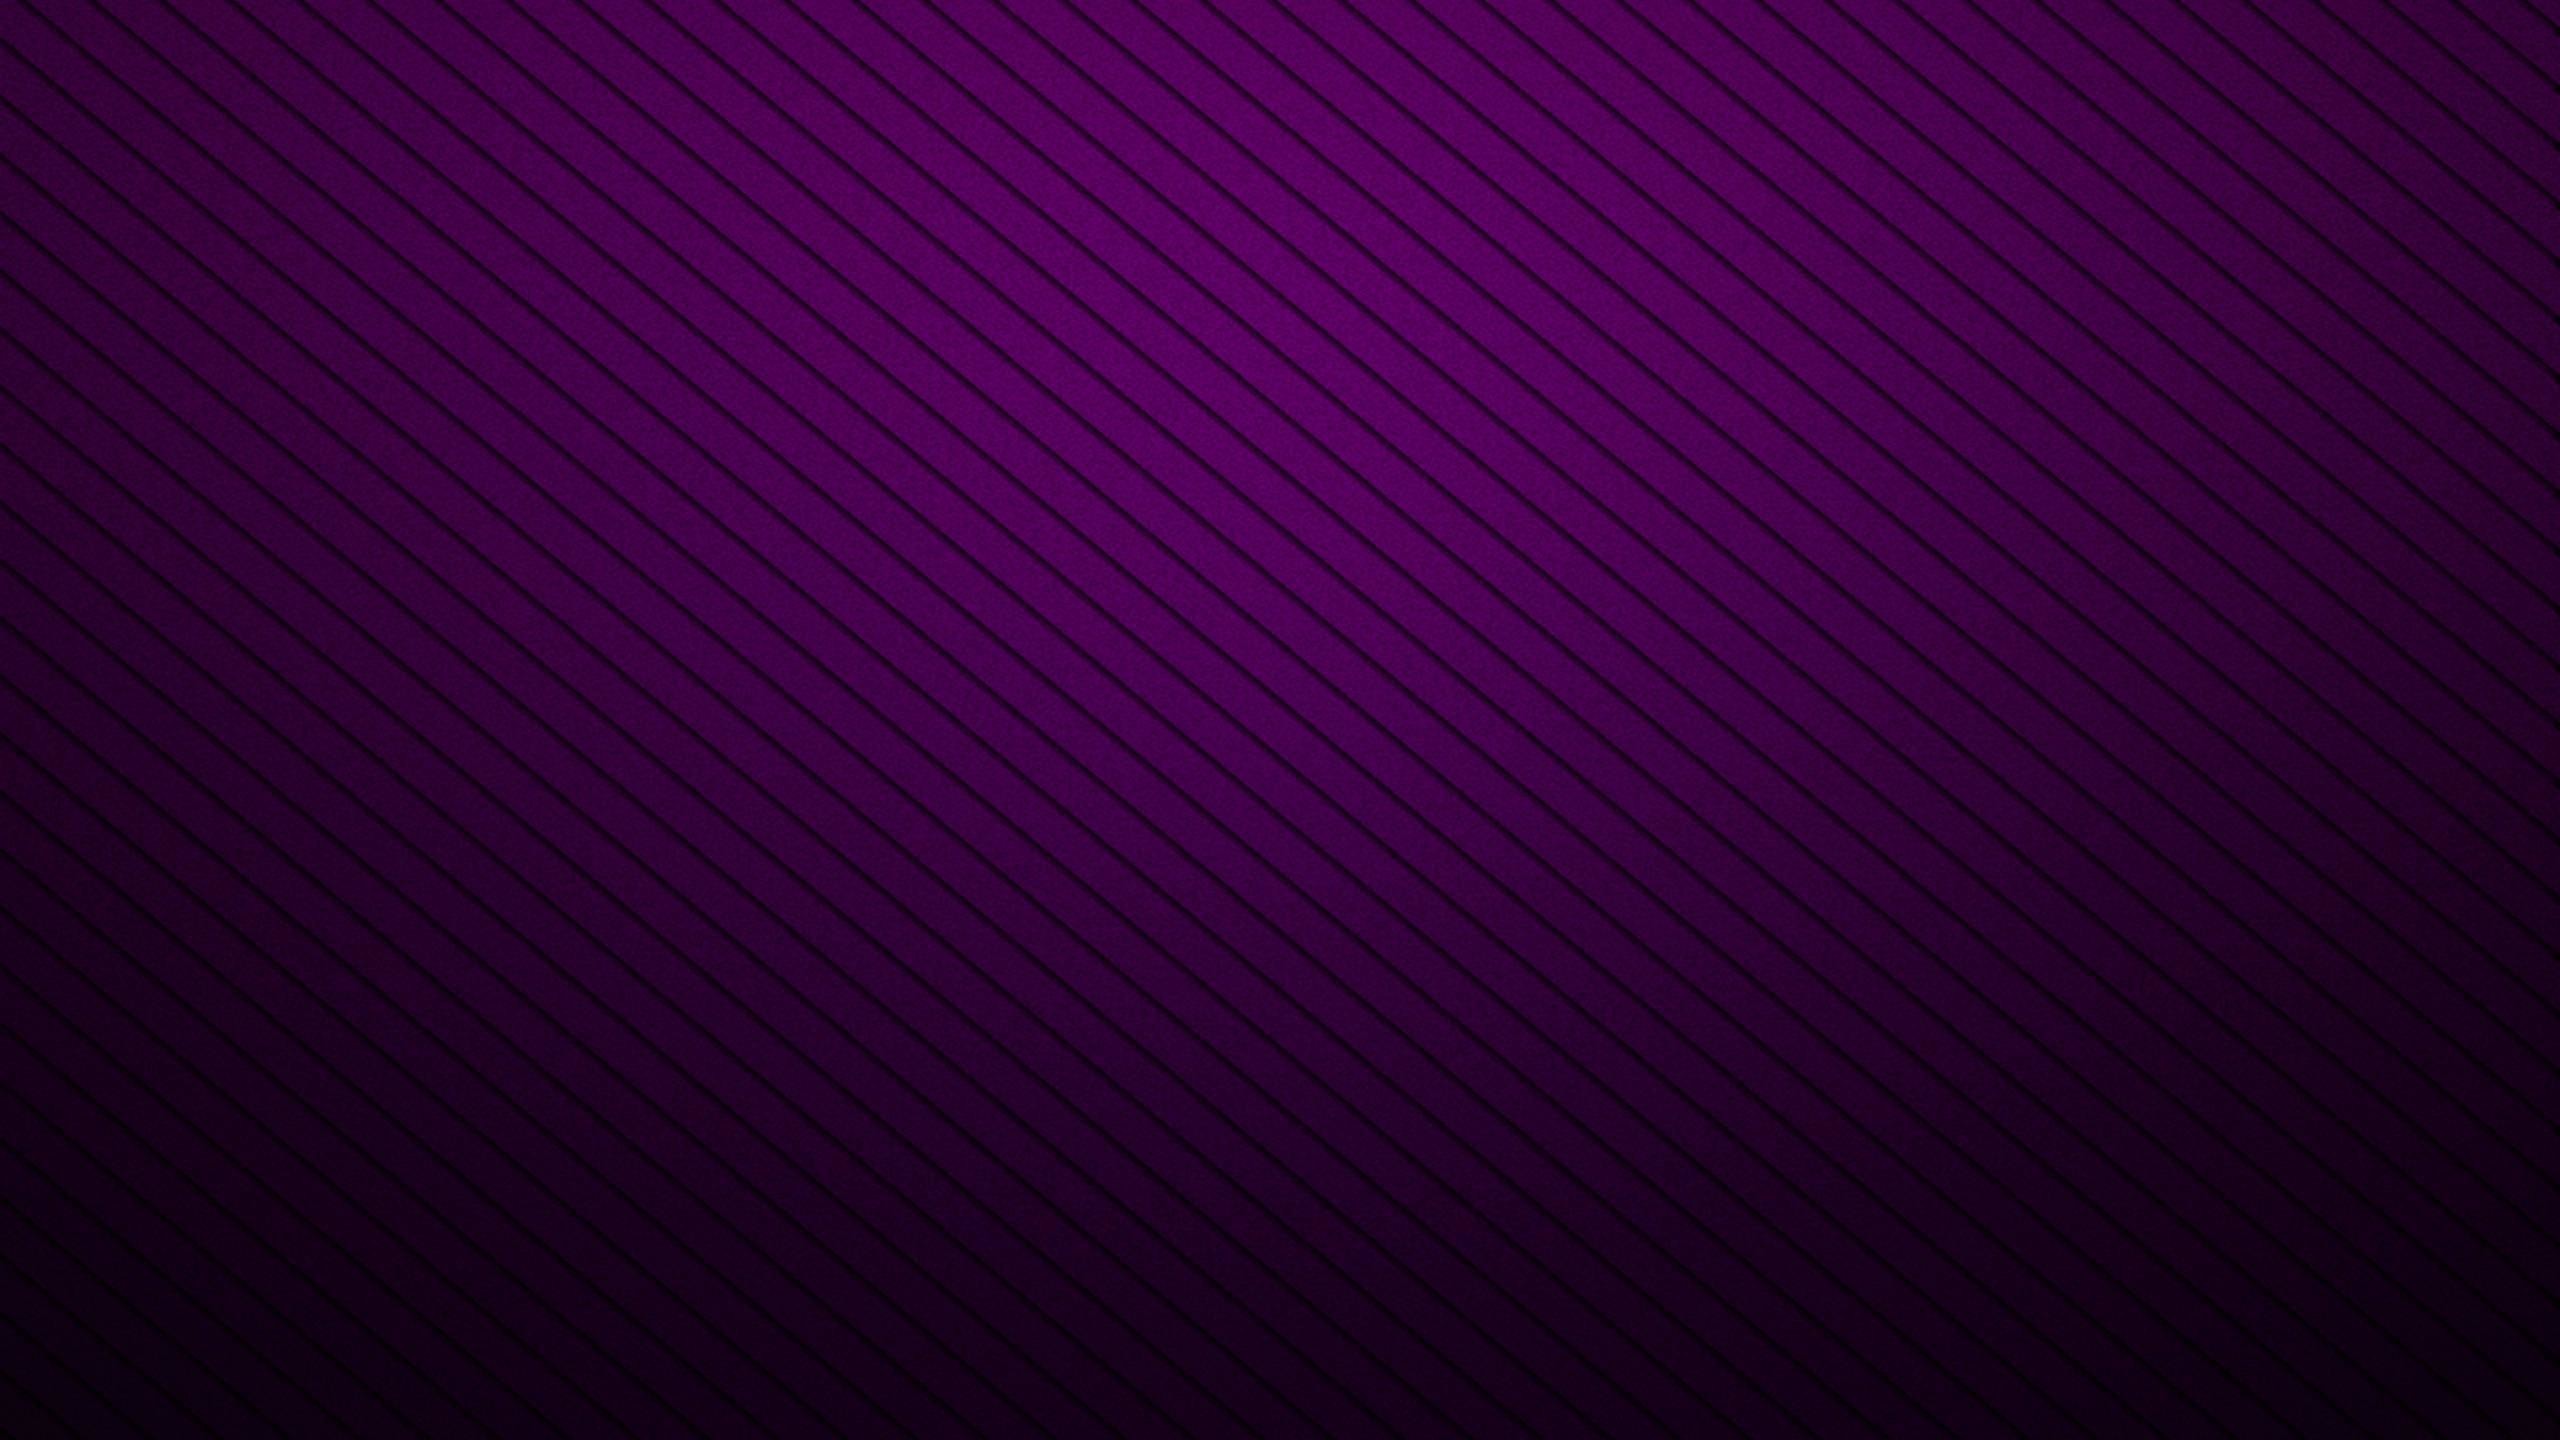 2560x1440 Purple And Black Texture Wallpaper Hd Picture 62141 Label: and .